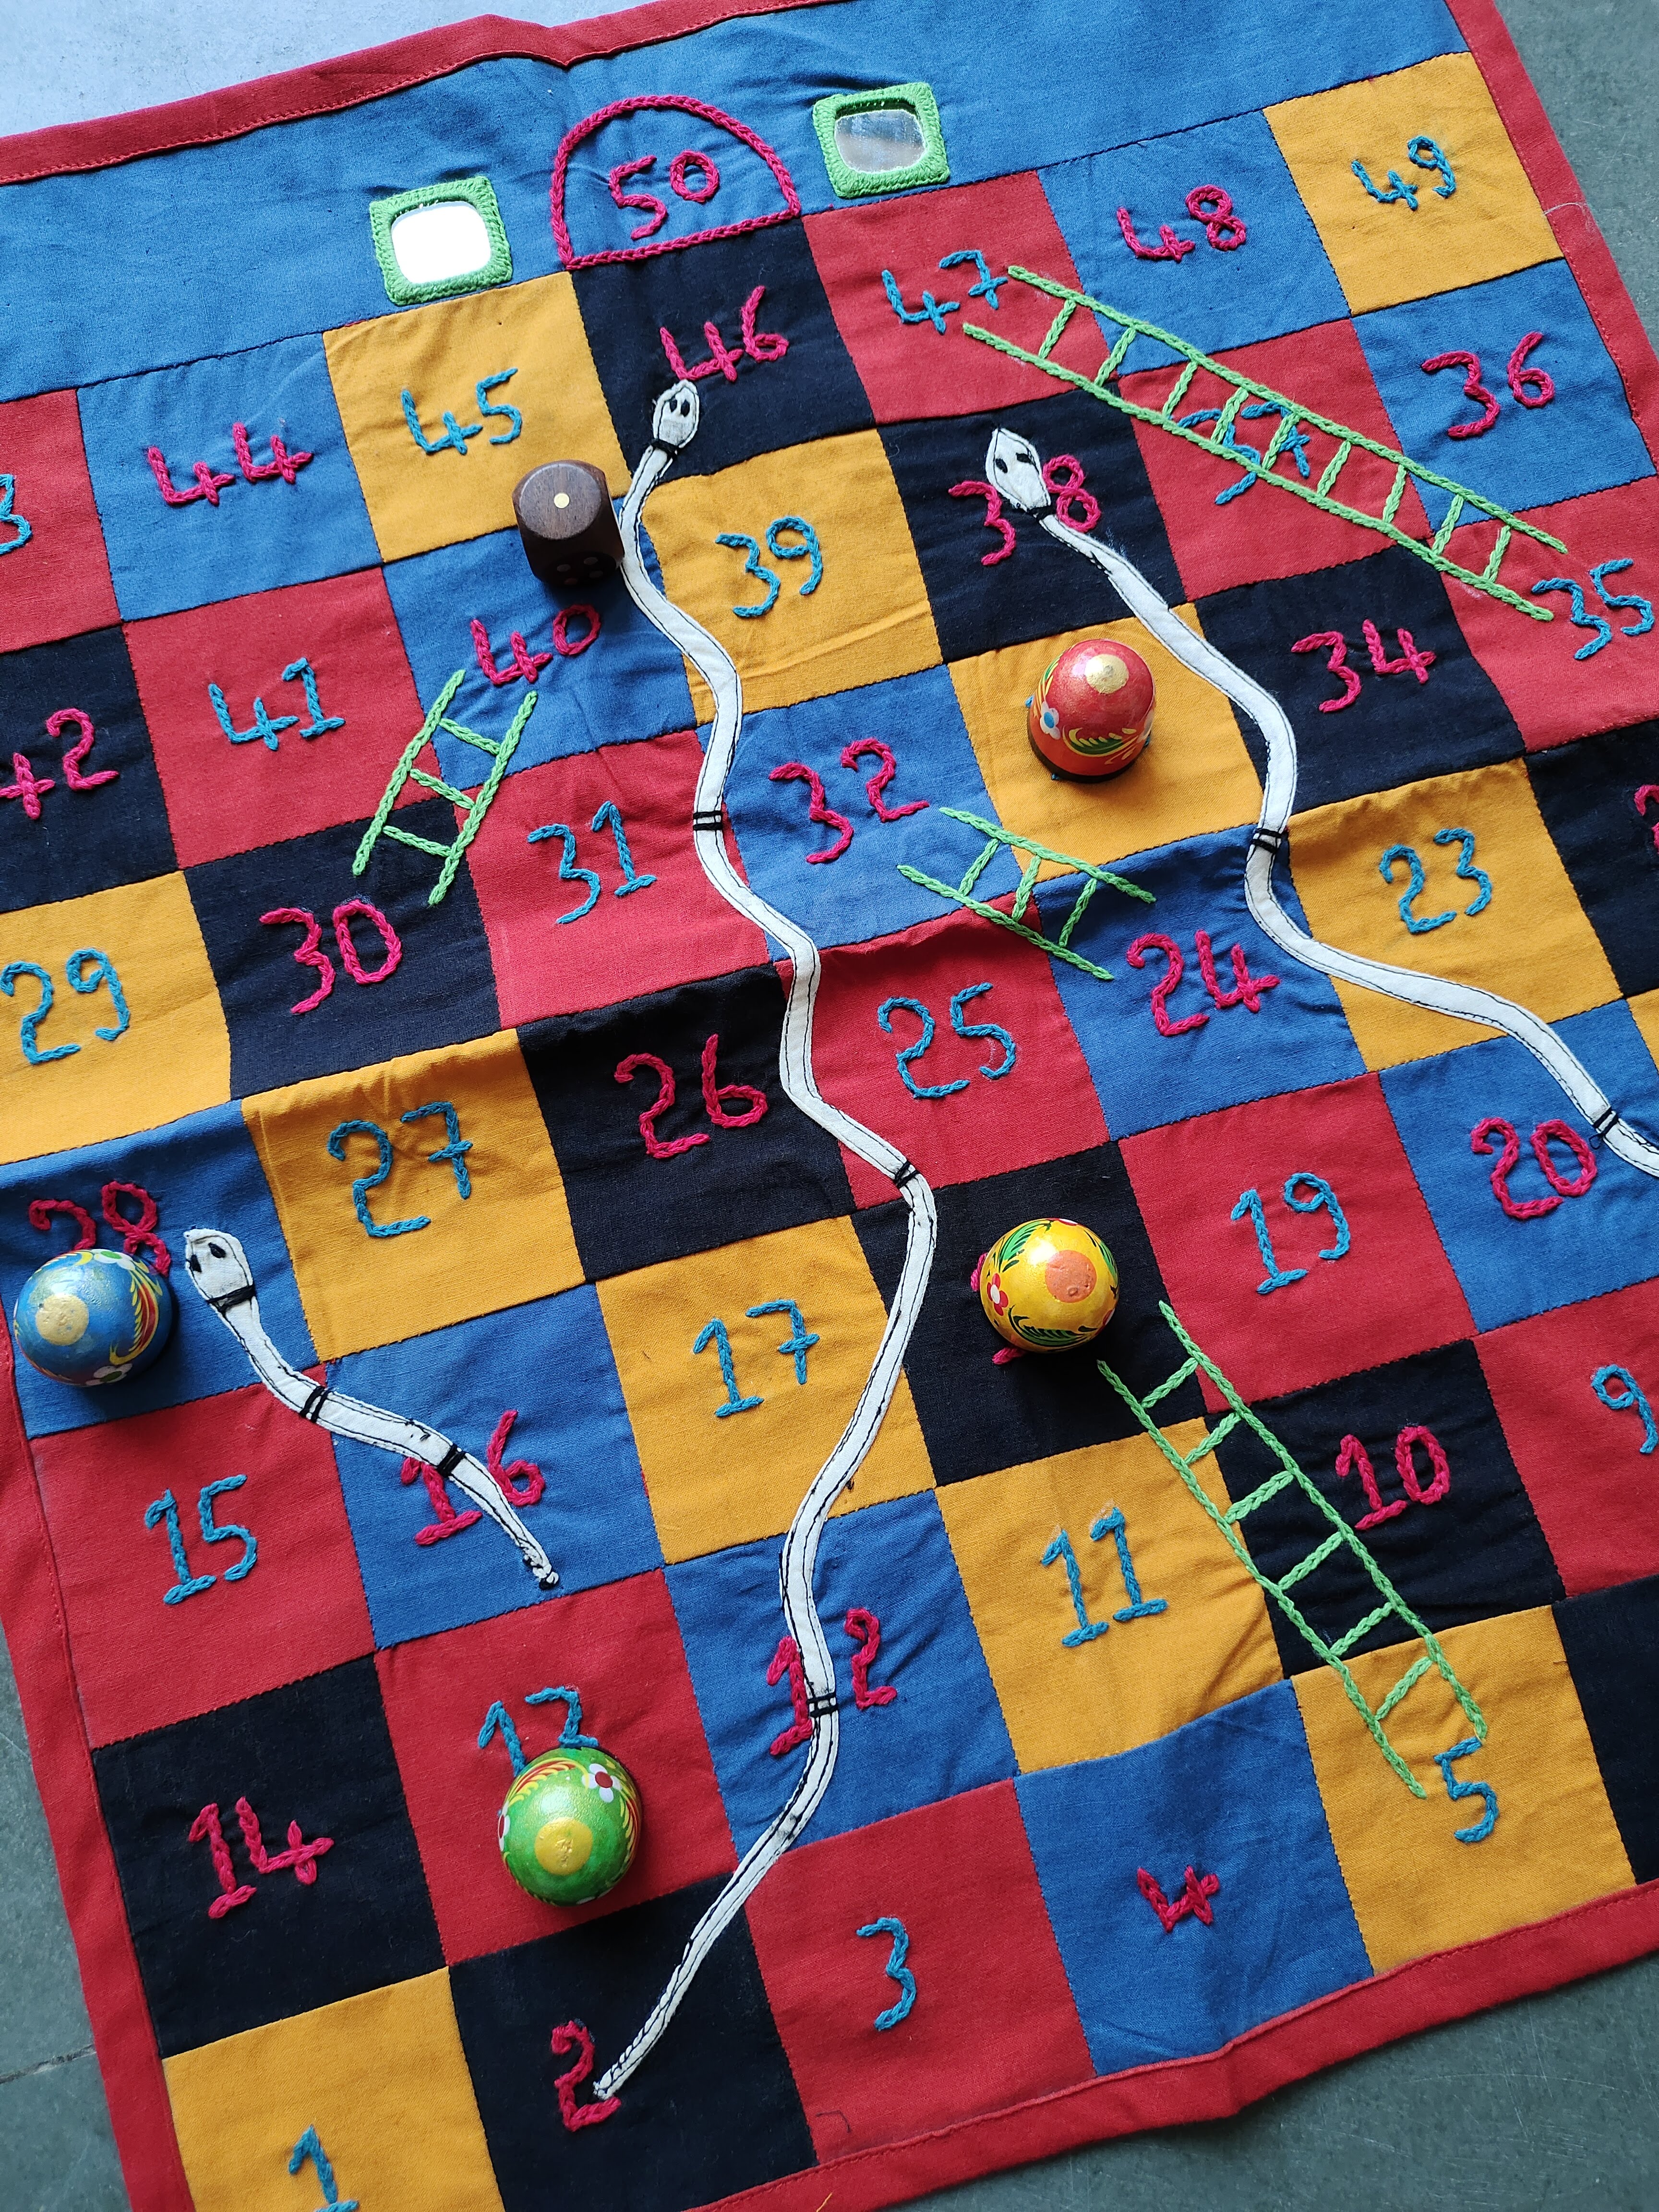 Embroidered snakes & ladders game: 50 squares